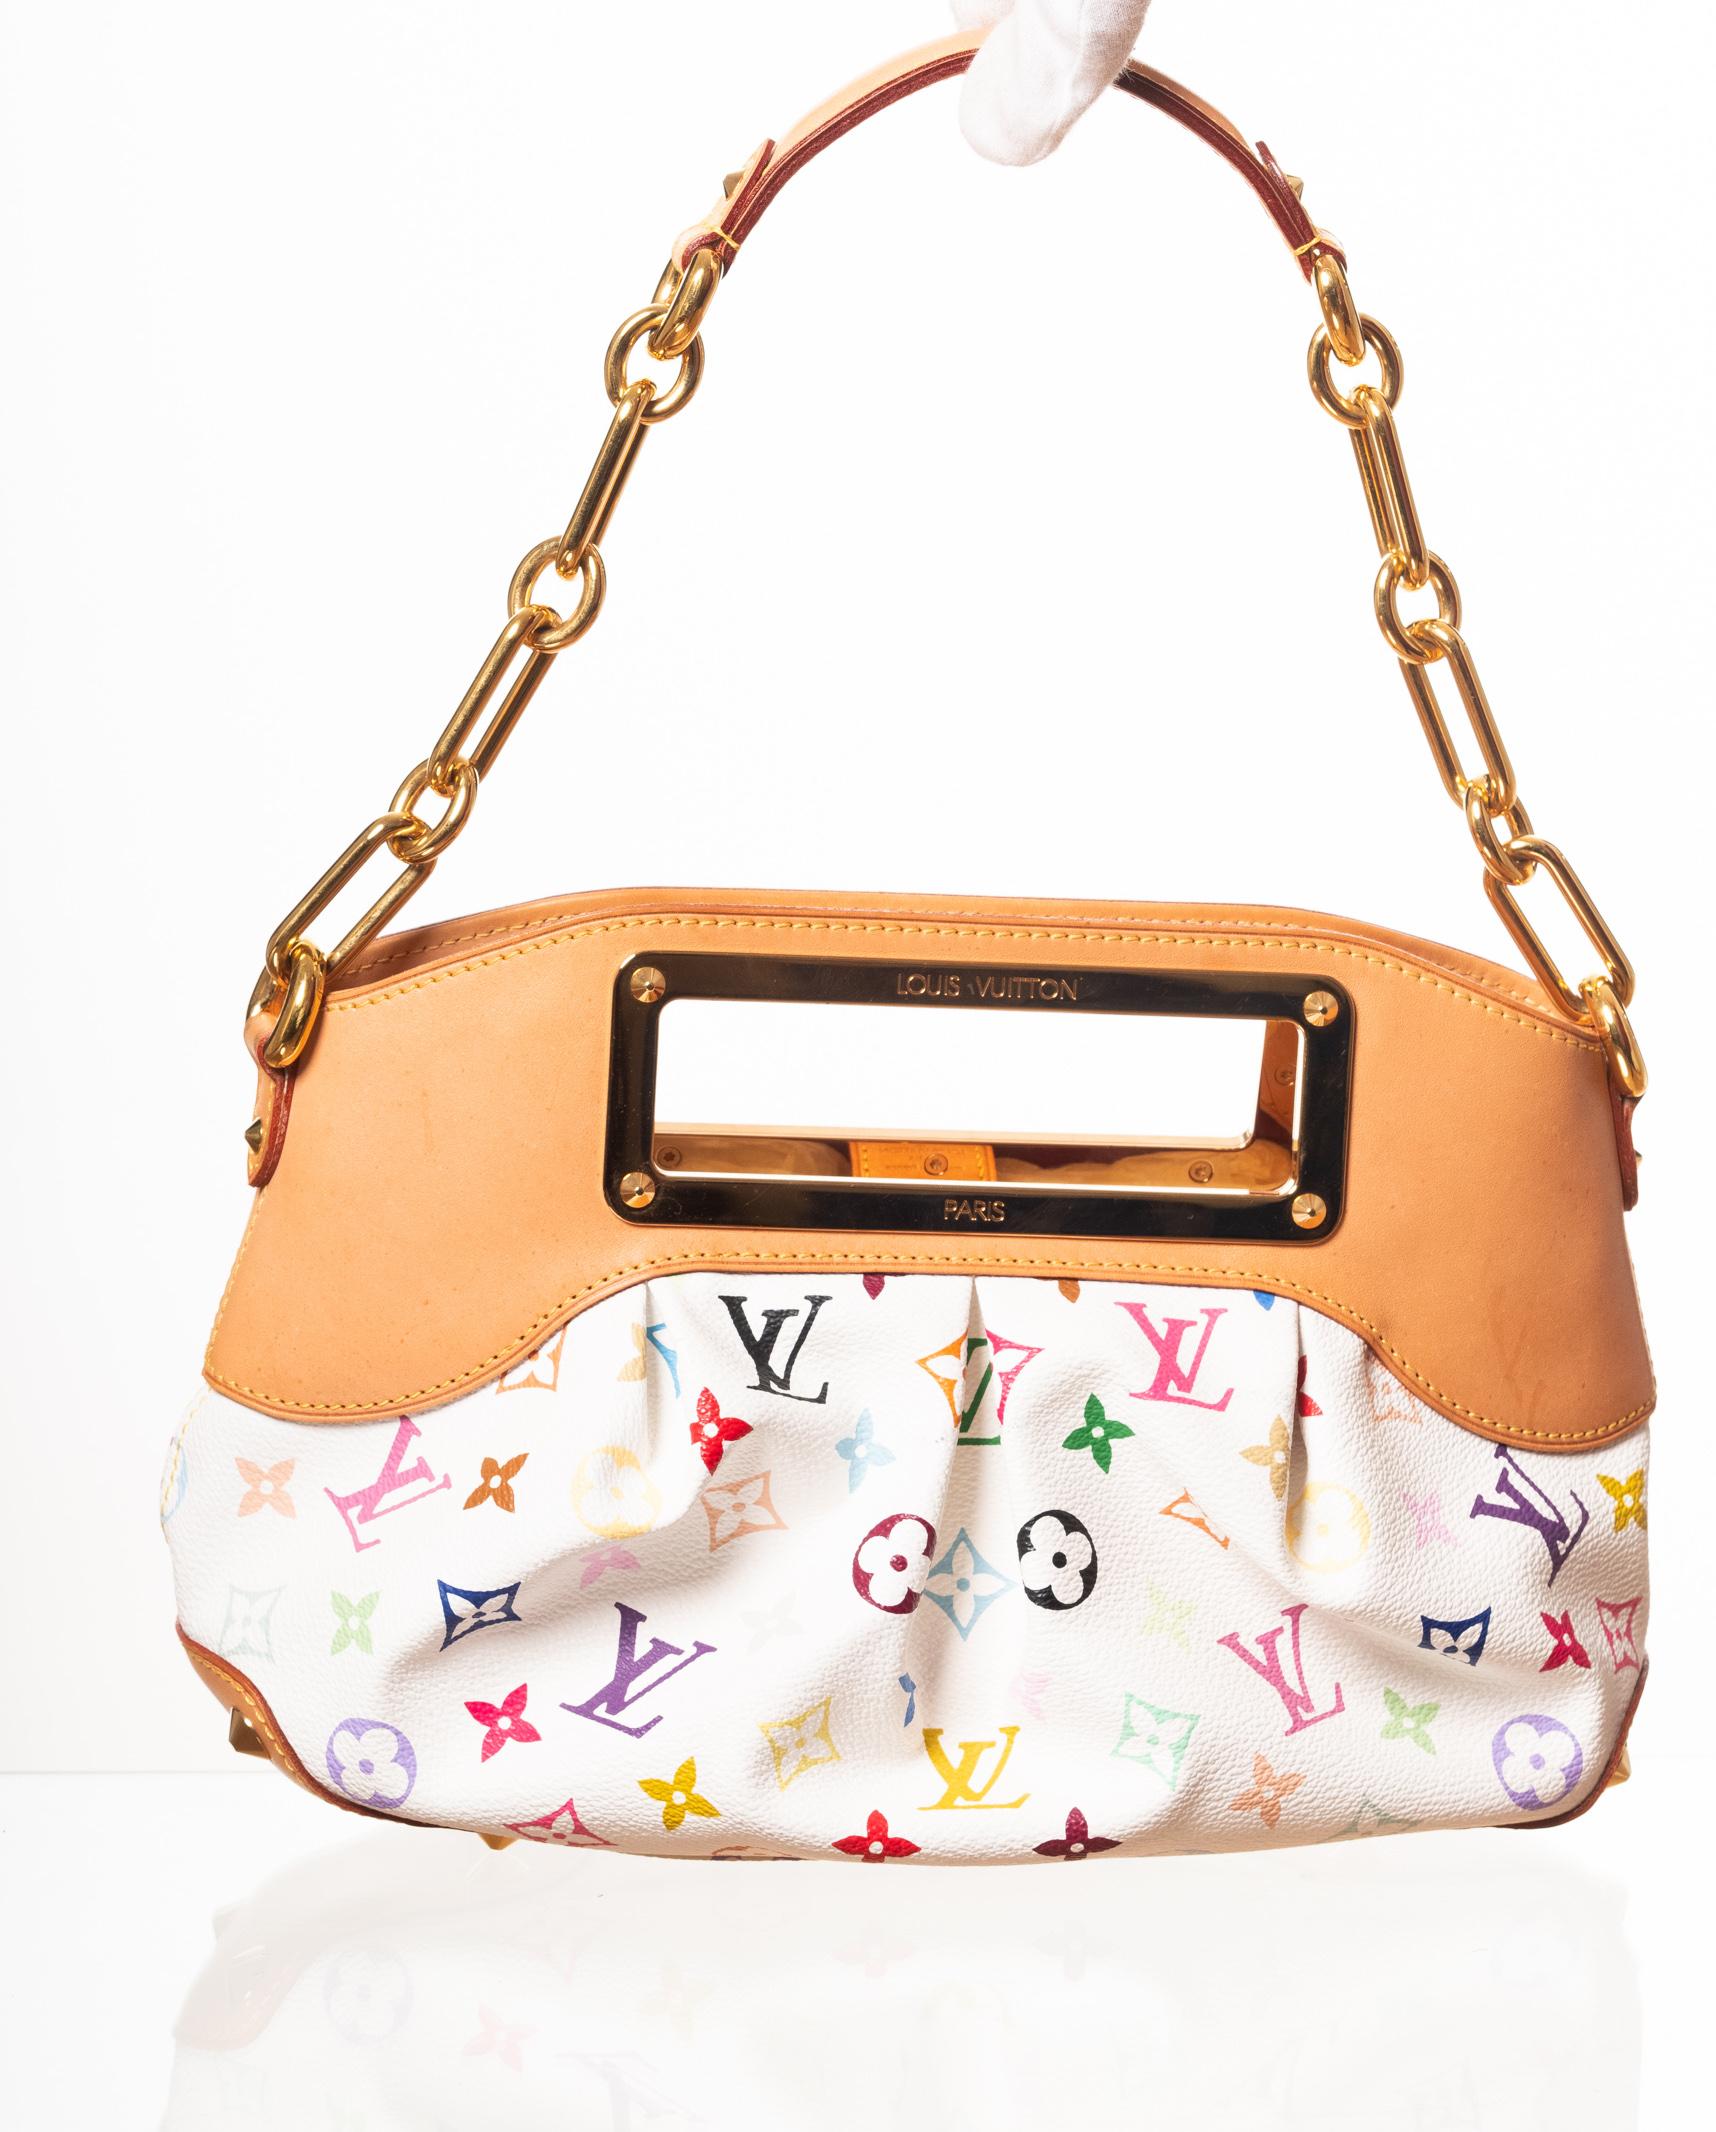 From the Takashi Murakami Collection. This style is made of white canvas with multicolour monogram. Featuring brass hardware, natural leather finishes, cut out handles, chain shoulder strap, top snap closure, bottom studs and alcantara interior